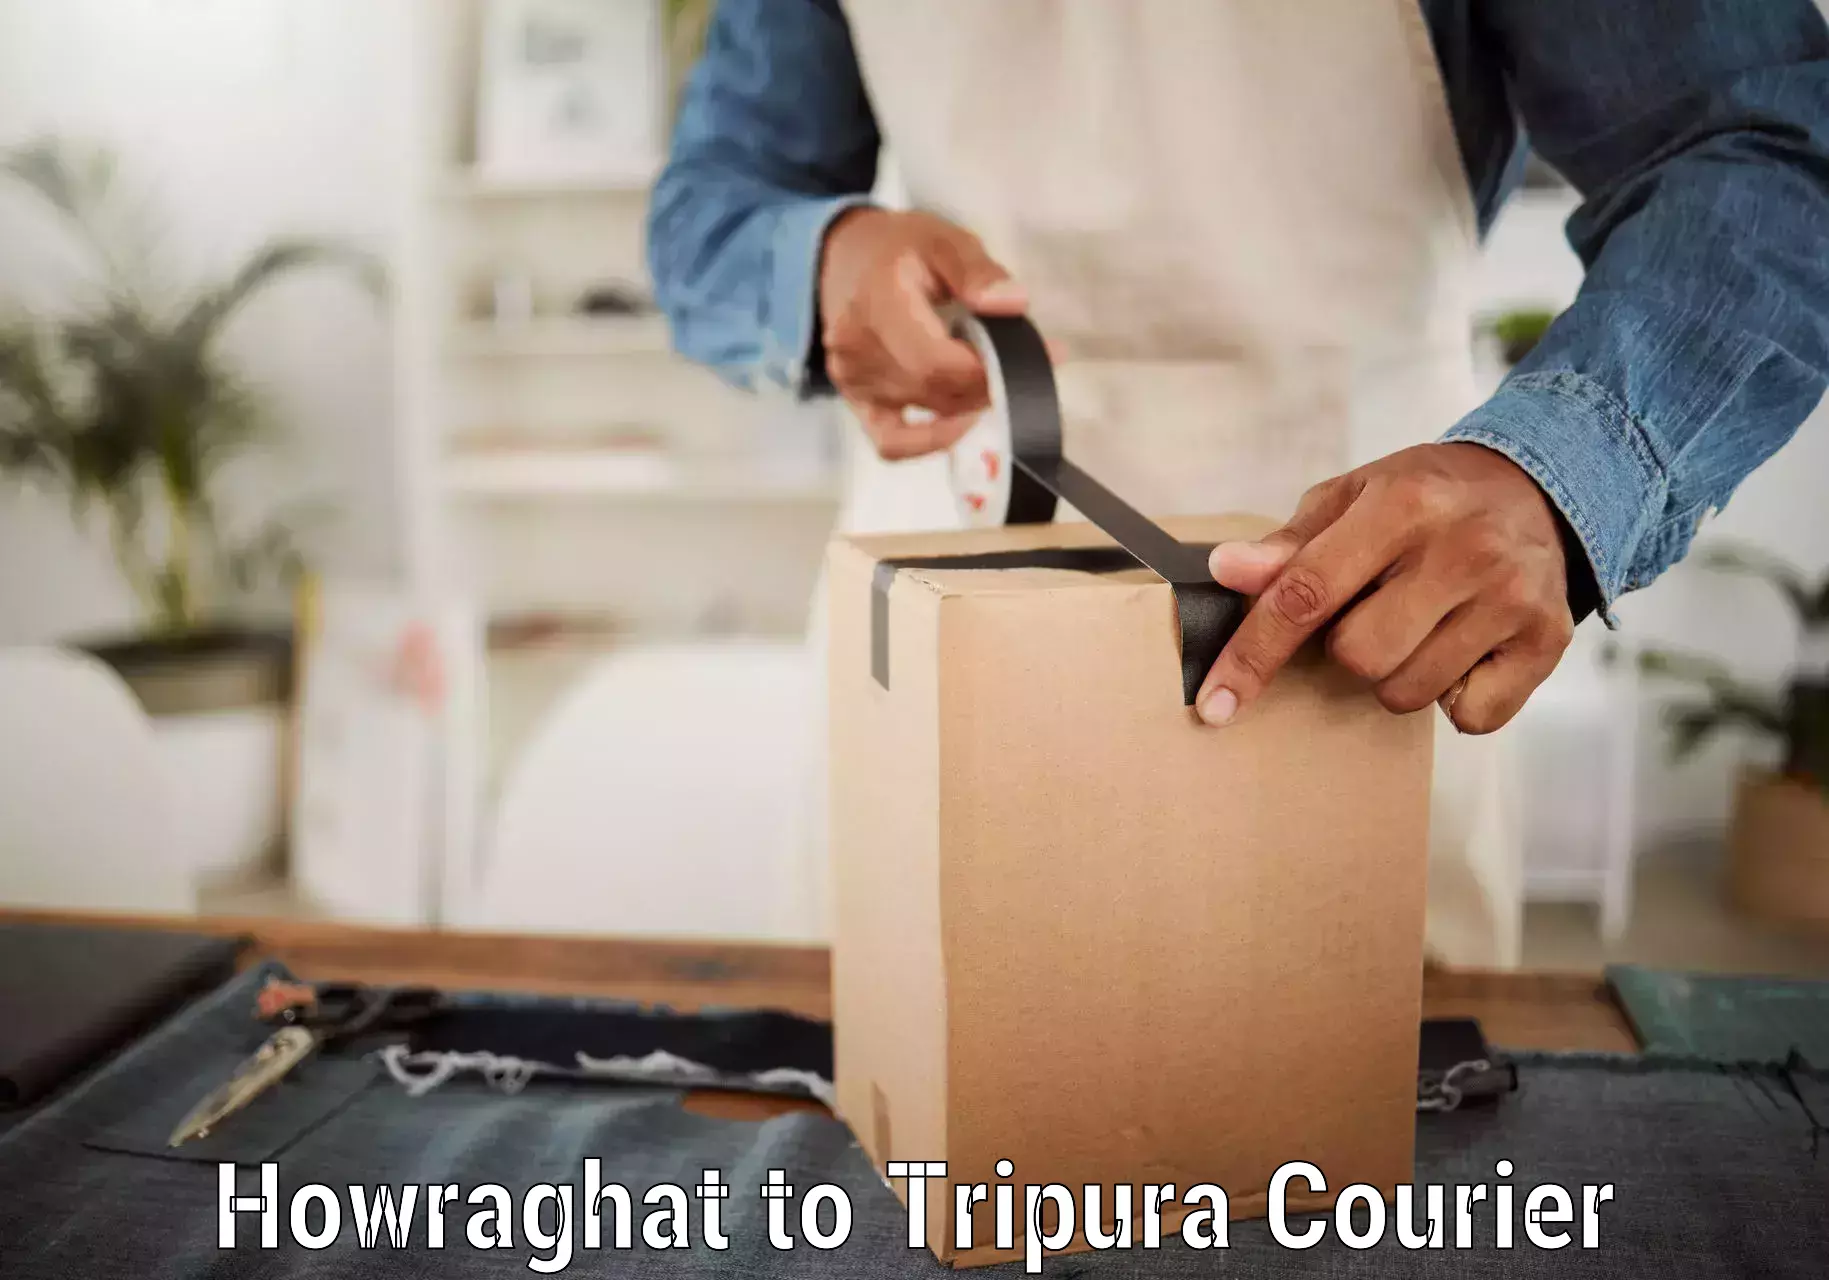 Cost-effective shipping solutions Howraghat to Dhalai